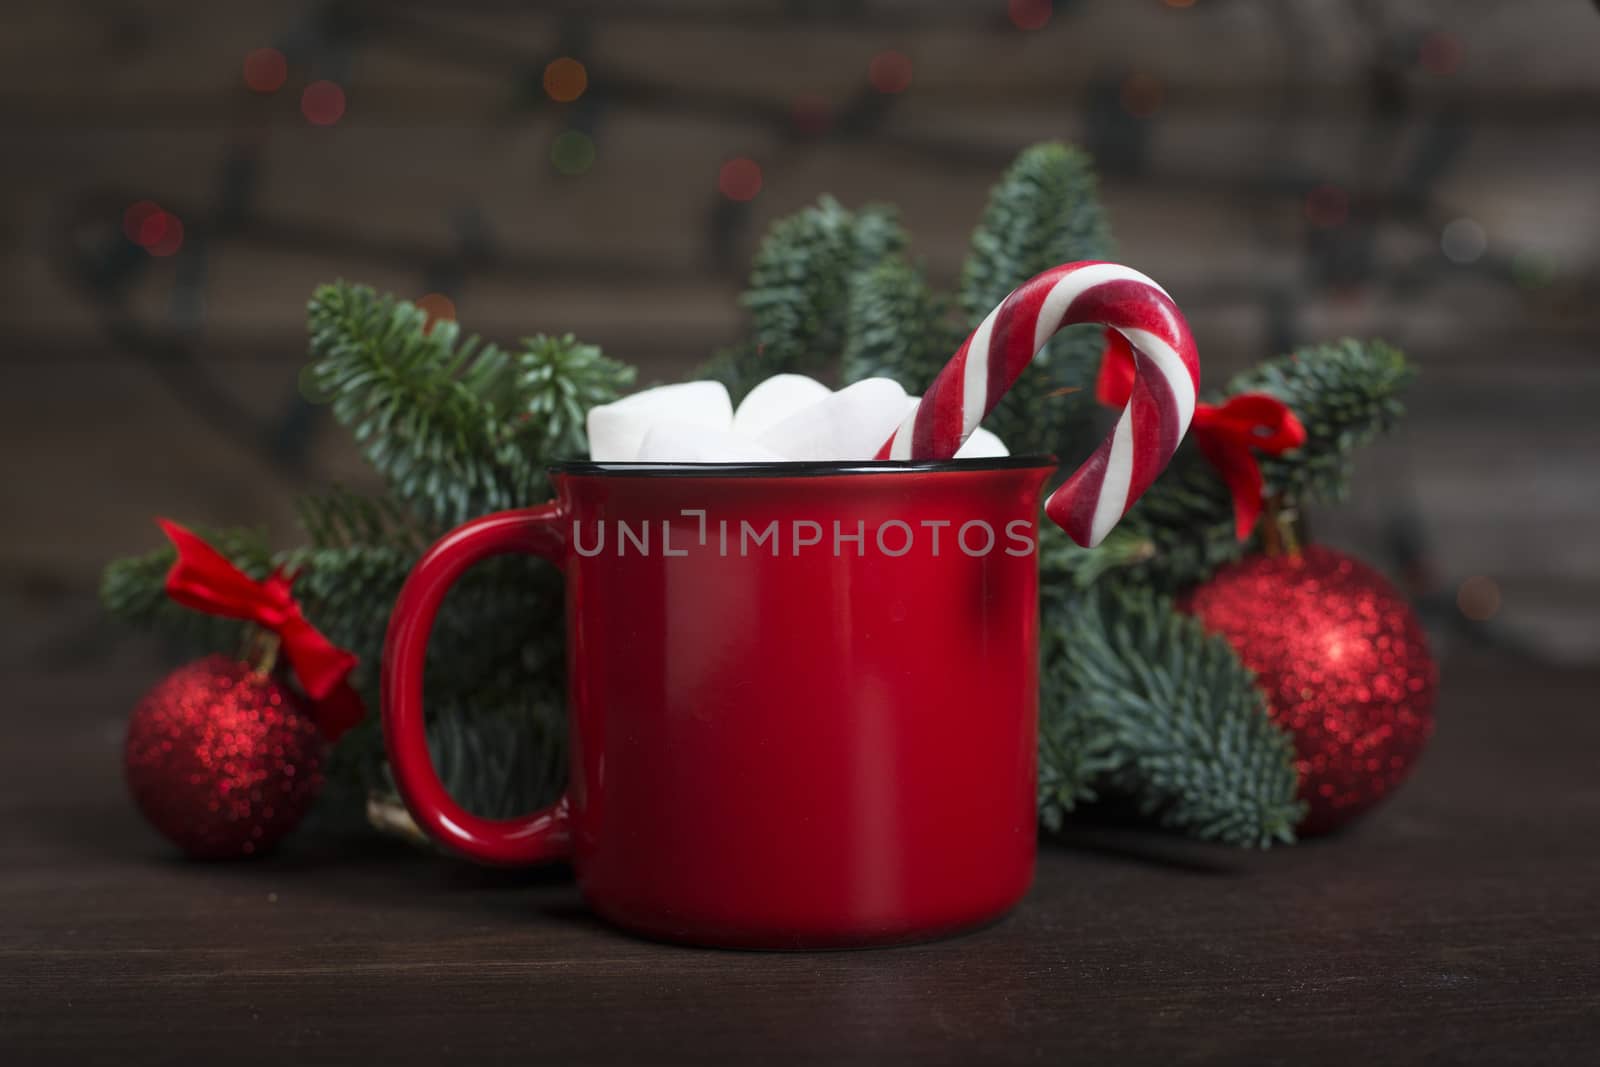 Cocoa in red mug with marshmallows candy cane fir tree branches and red baubles on dark wooden background with bokeh lights